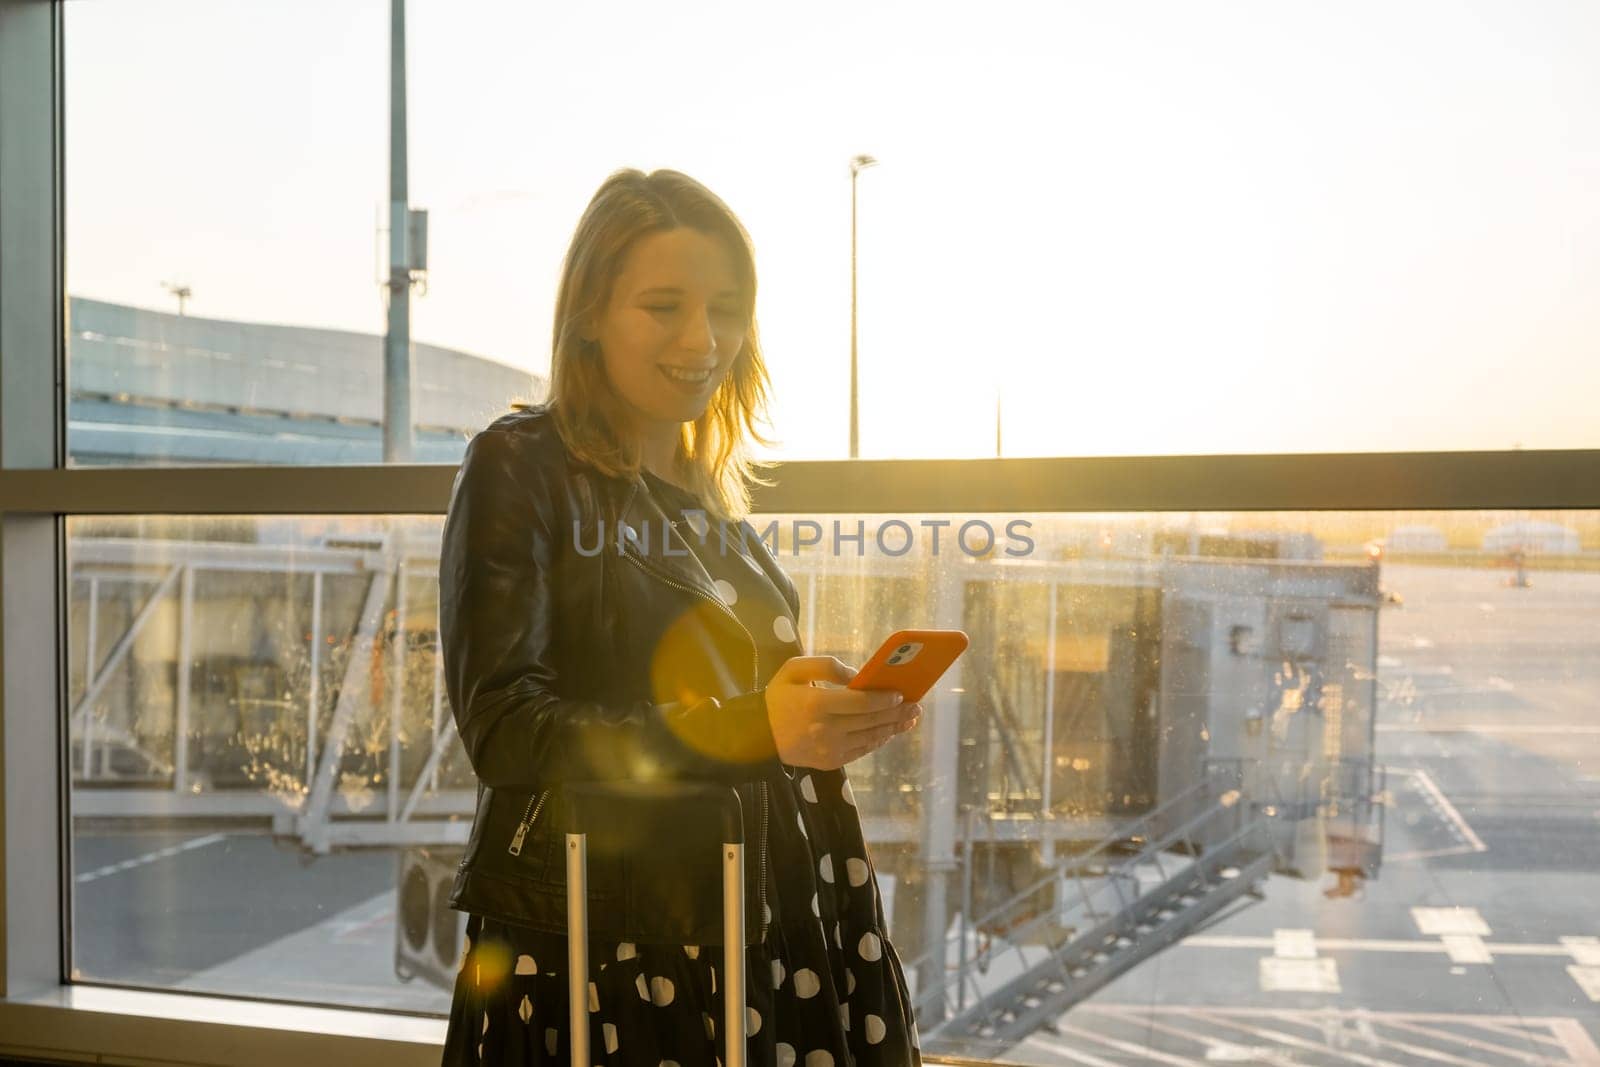 A young woman, checking her mobile phone, is prepared for boarding